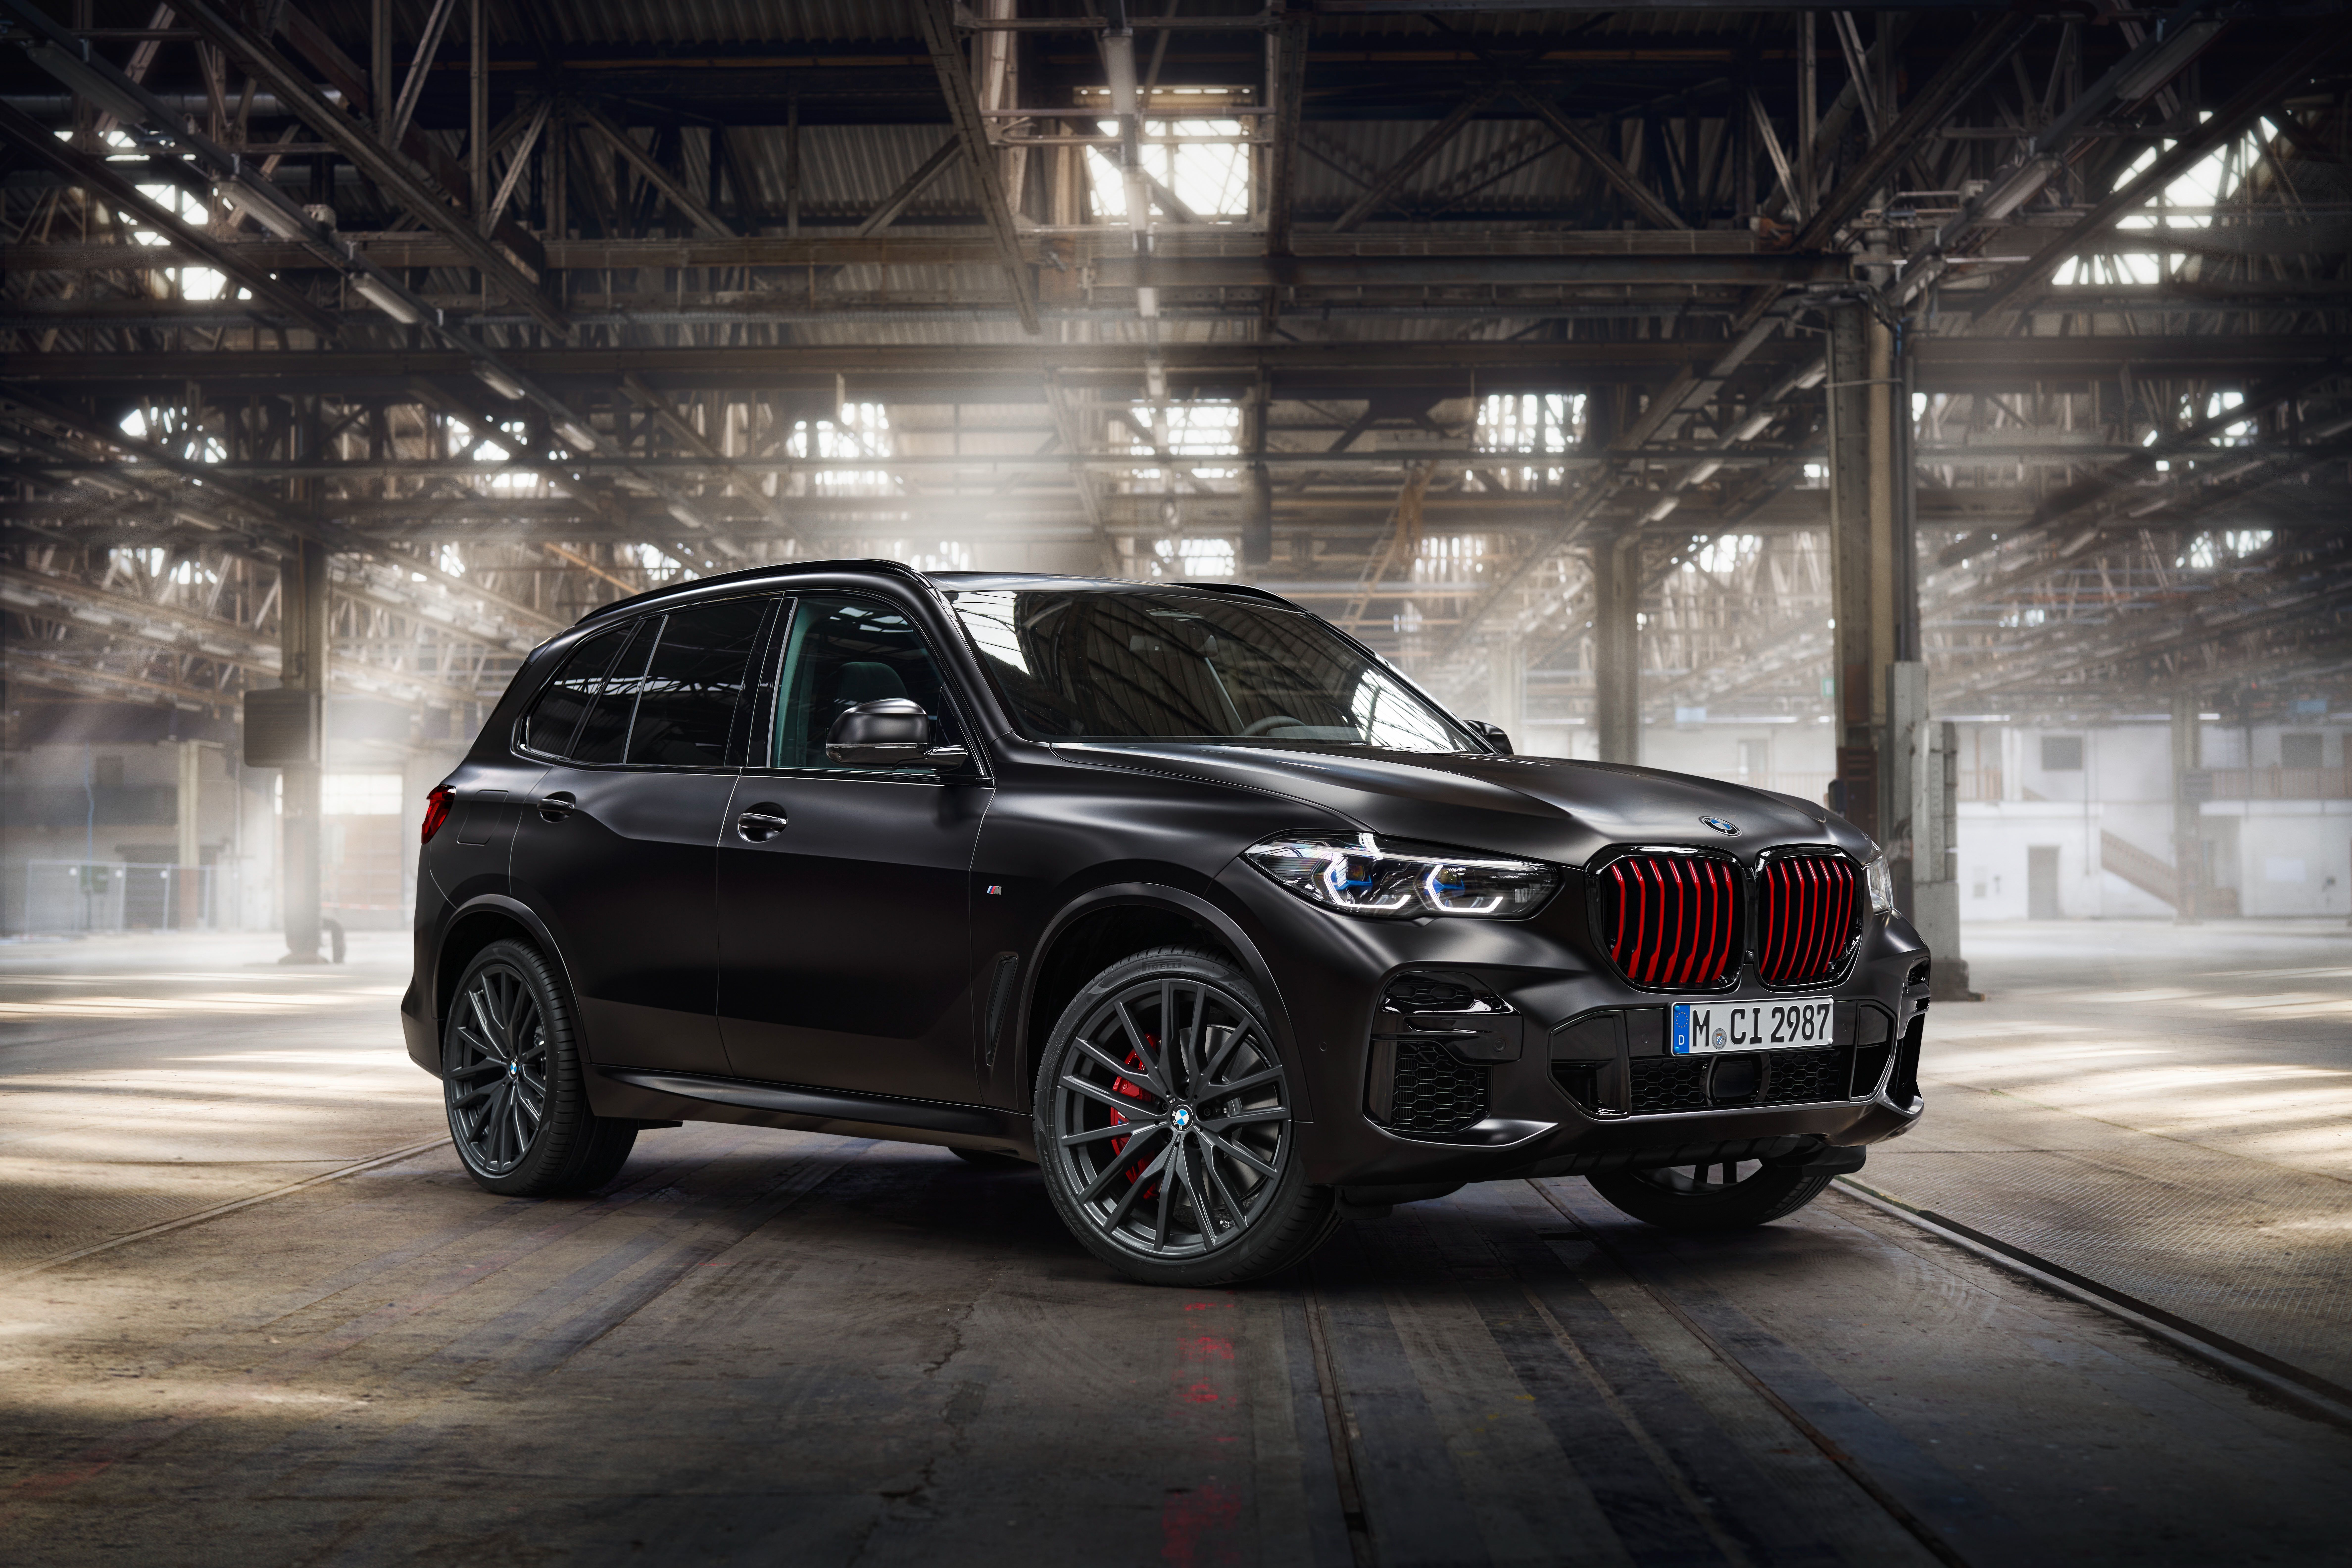 2022 BMW X5 Black Vermilion Edition Is A Loaded, Blacked Out, Exclusive XDrive40i